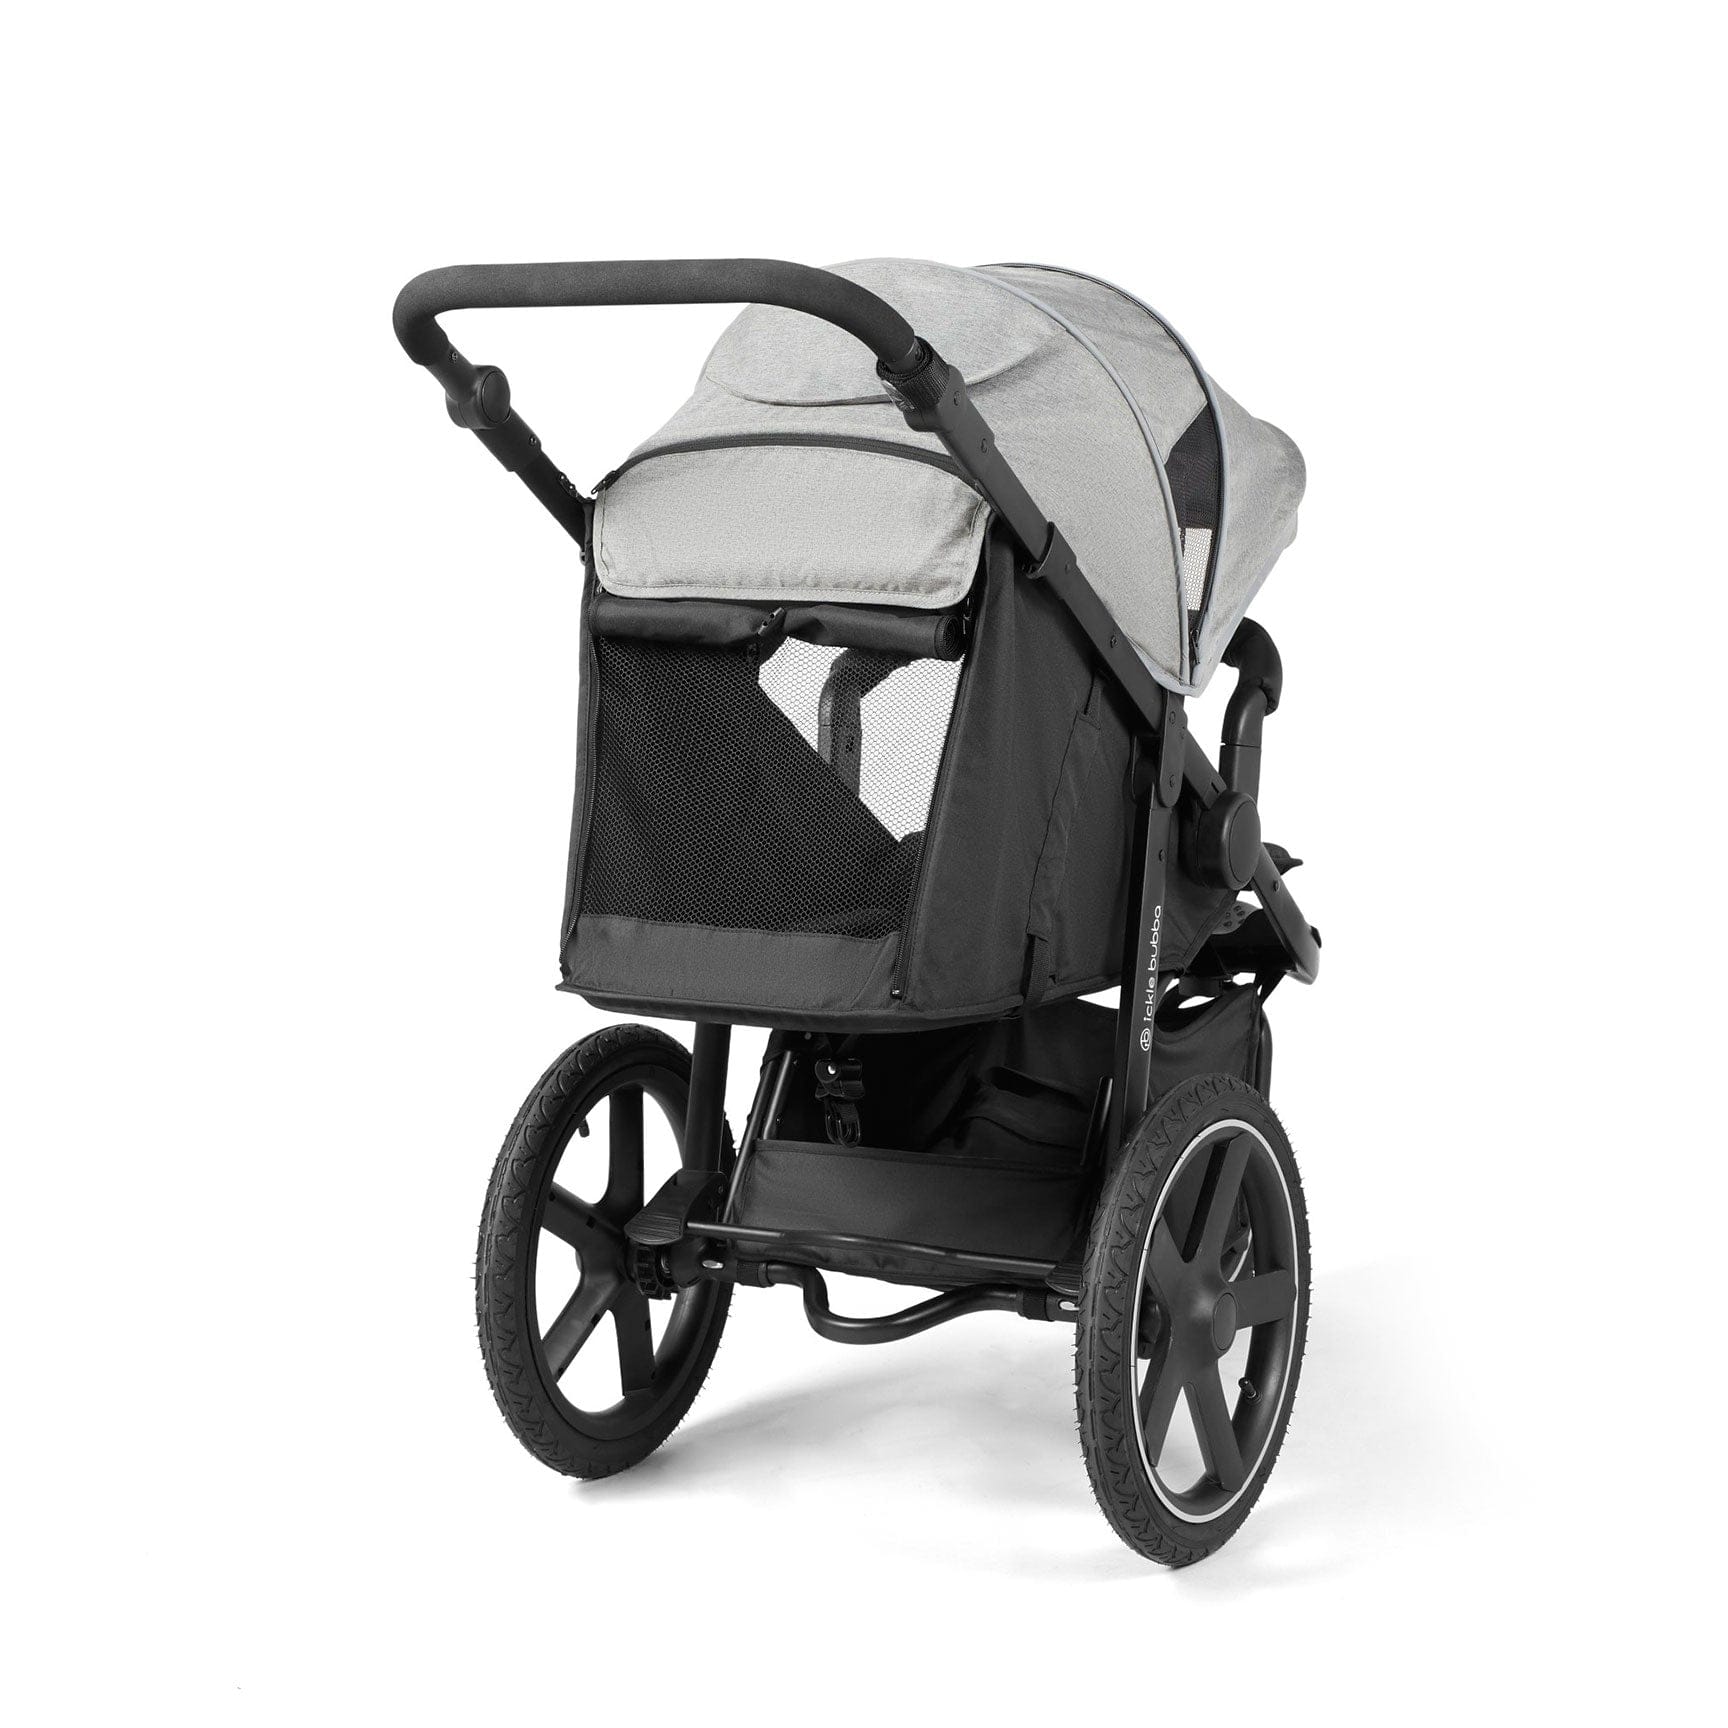 Ickle Bubba 3 wheel pushchairs Ickle Bubba Venus Prime Jogger Stroller 18-004-300-014